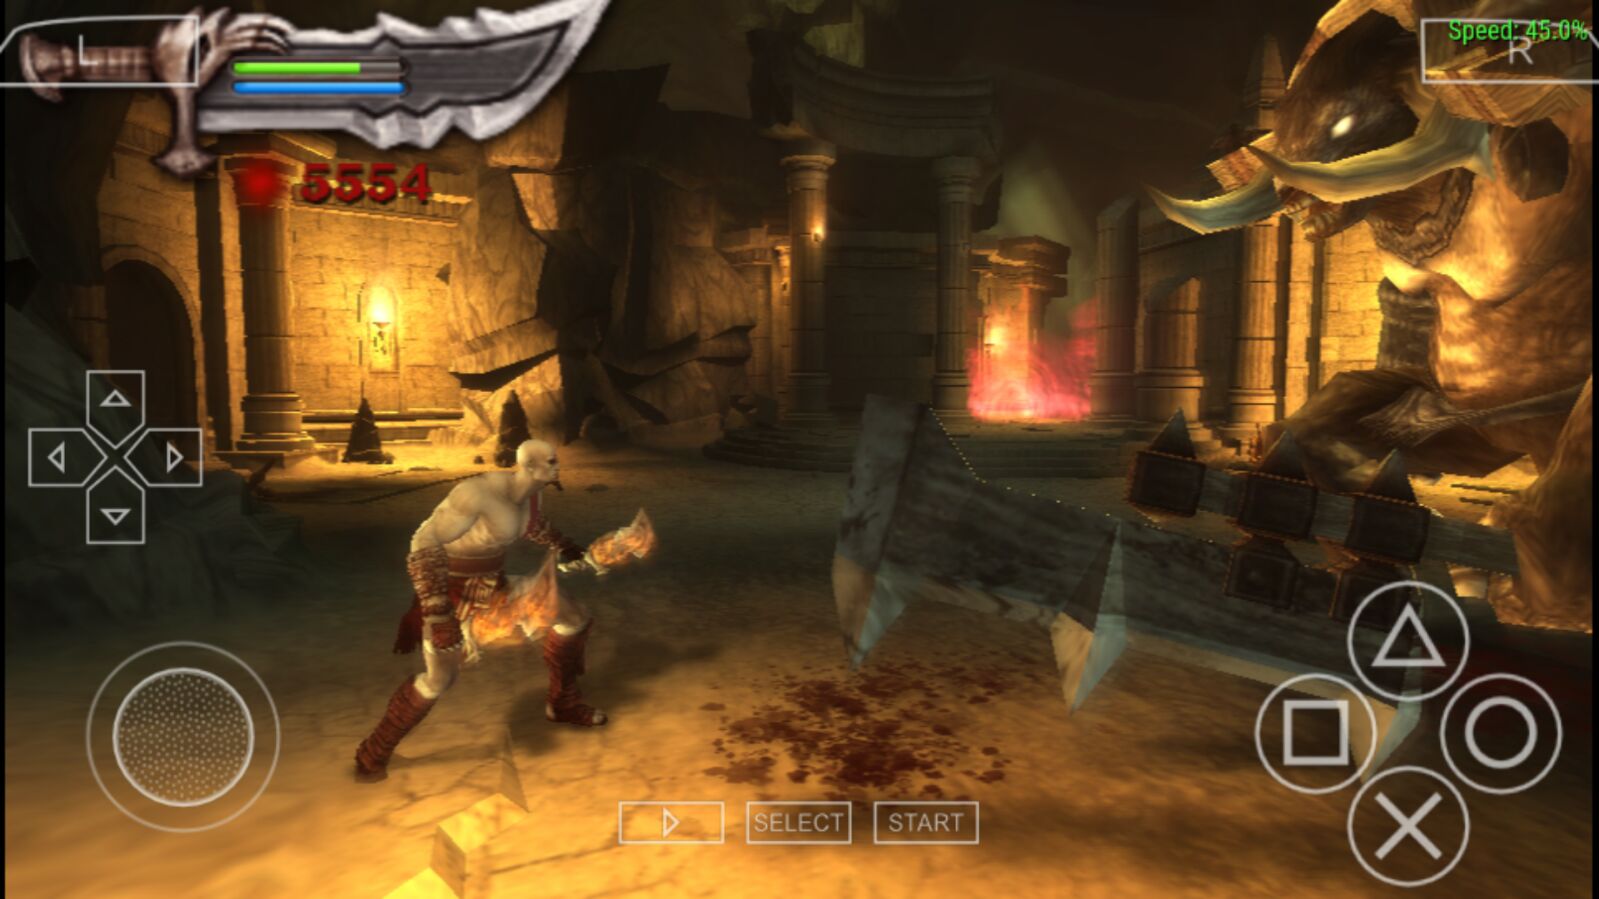 ppsspp god of war chains of olympus